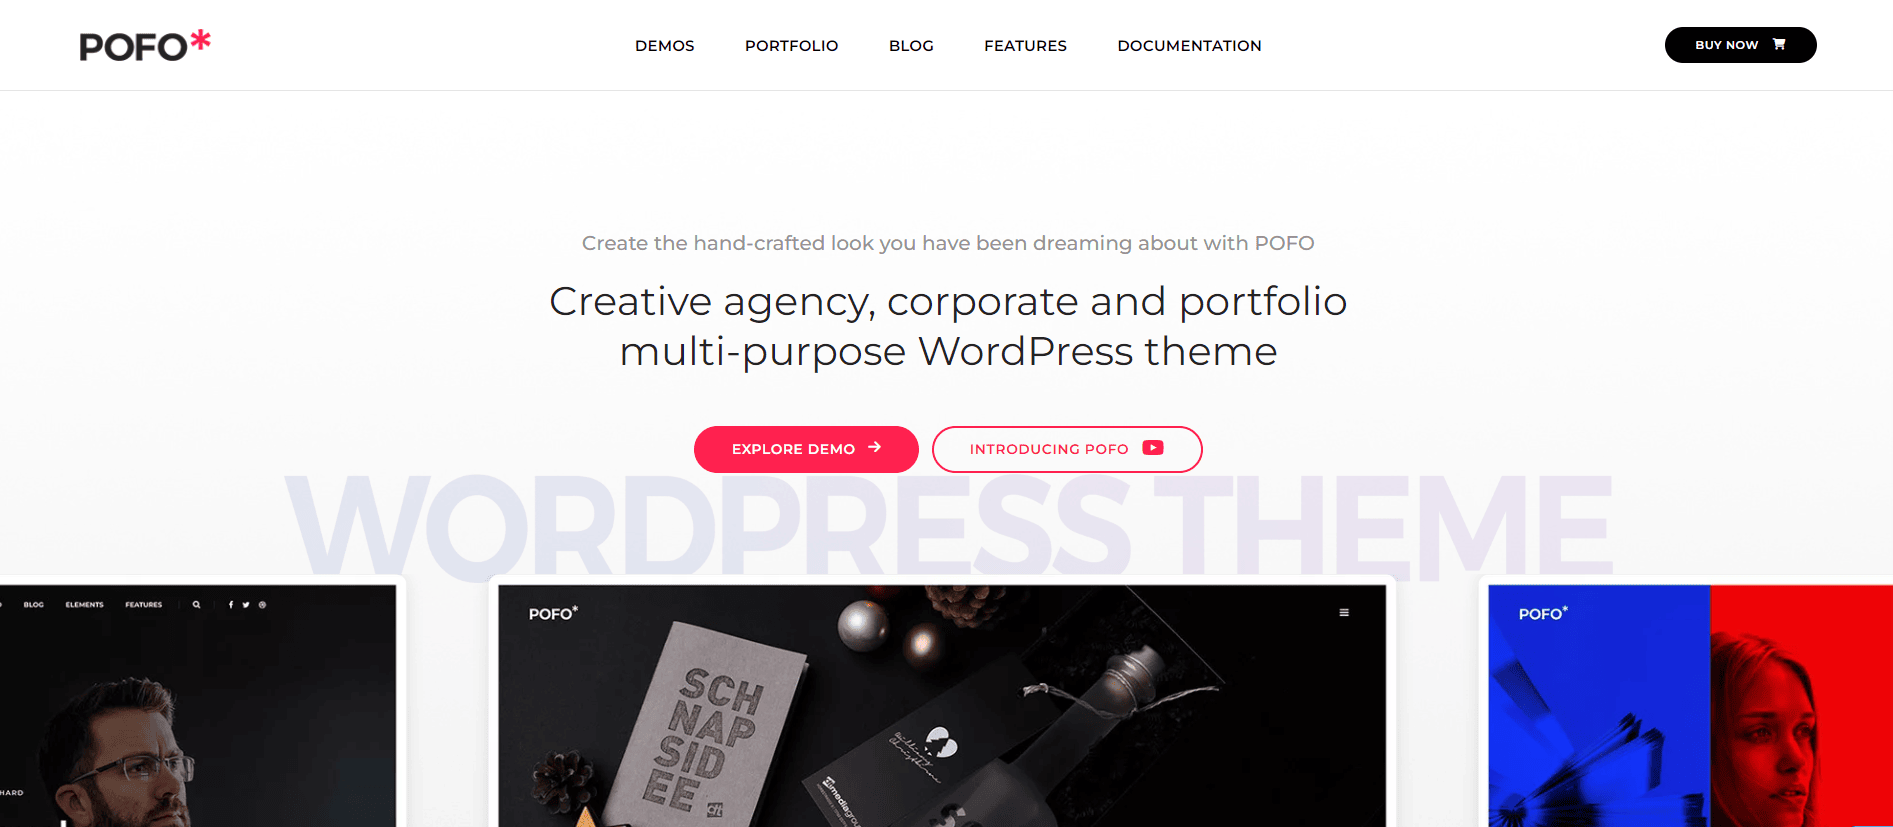 POFO WordPress theme homepage with bold text stating 'Creative agency, corporate and portfolio multi-purpose WordPress theme' and various portfolio images.